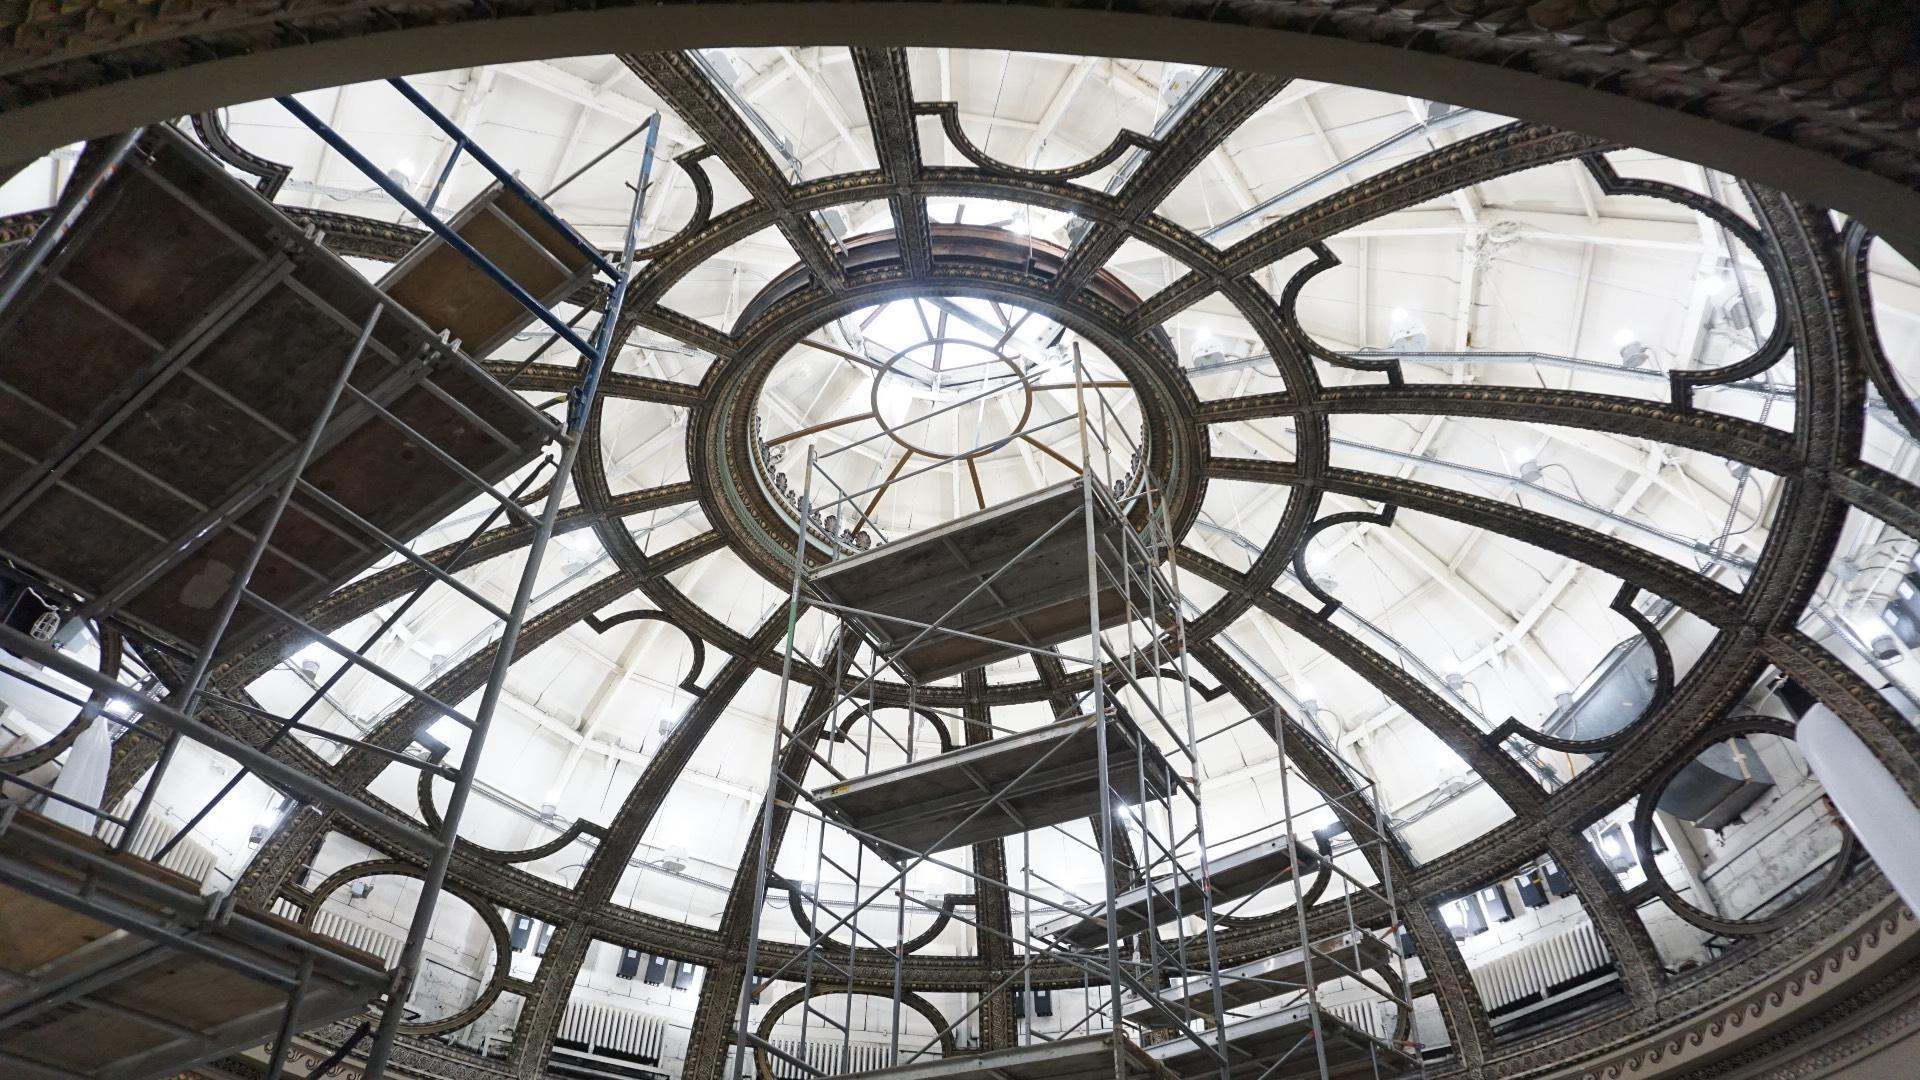 The dome's 62,000 pieces of glass have been removed for restoration and will be reinstalled. (Courtesy of Harboe Architects)